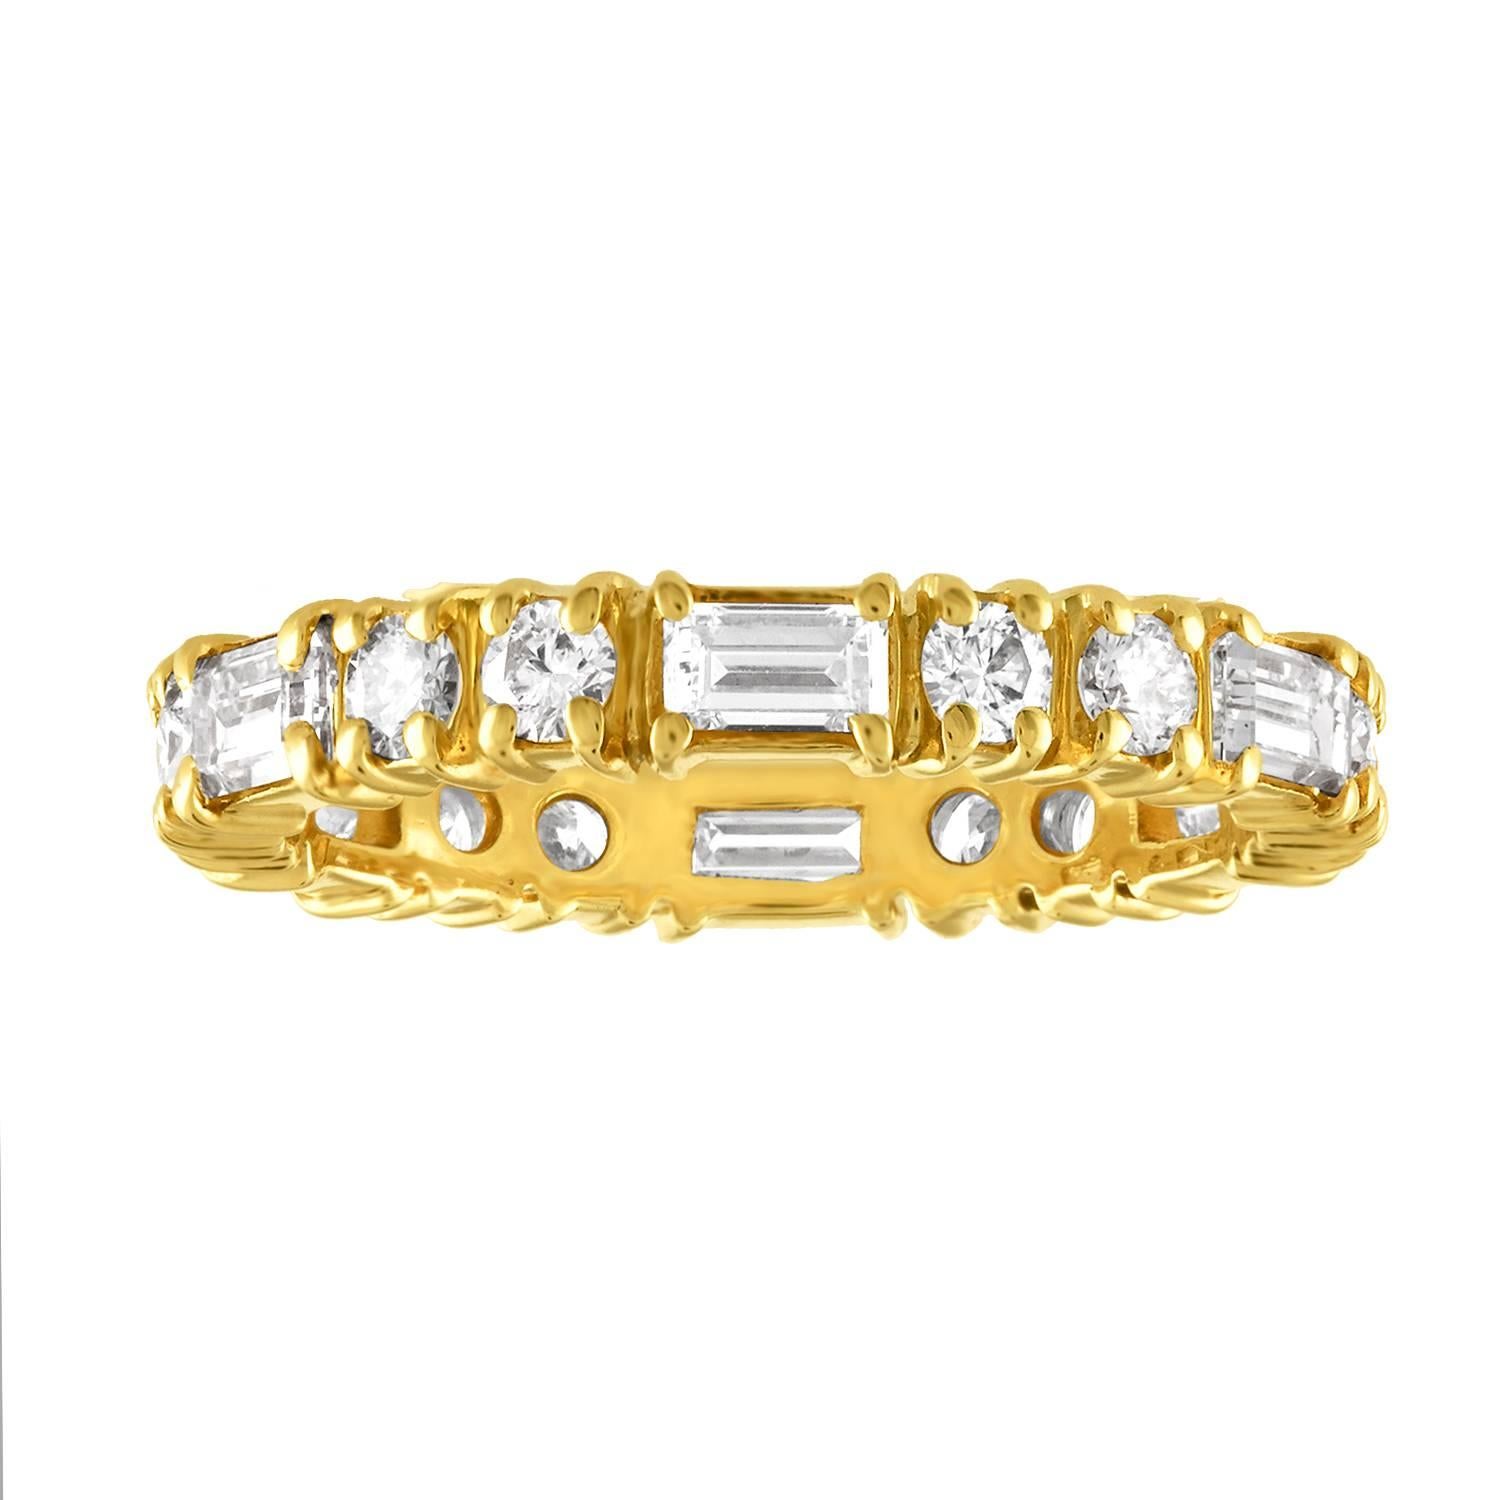 Beautiful Eternity Band with Alternating Round & Baguette Diamonds
The ring is 18KY Gold.
There are 1.50 Carats In Diamonds F/G VS
The ring weighs 3.1 grams
The ring is a size 5.75, cannot be sized.